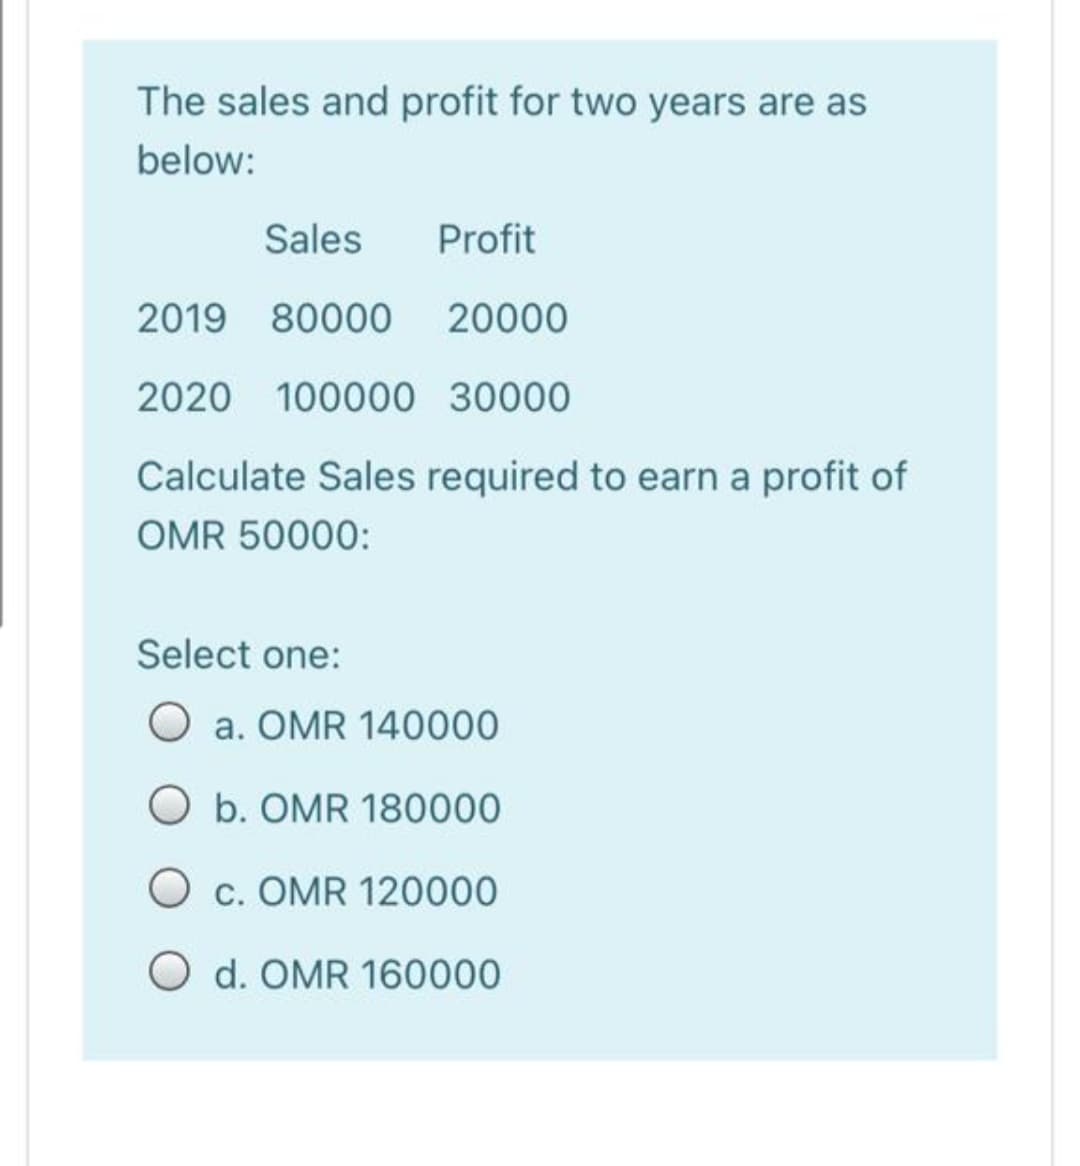 The sales and profit for two years are as
below:
Sales
Profit
2019 80000
20000
2020 100000 30000
Calculate Sales required to earn a profit of
OMR 50000:
Select one:
a. OMR 140000
O b. OMR 180000
O c. OMR 120000
O d. OMR 160000
